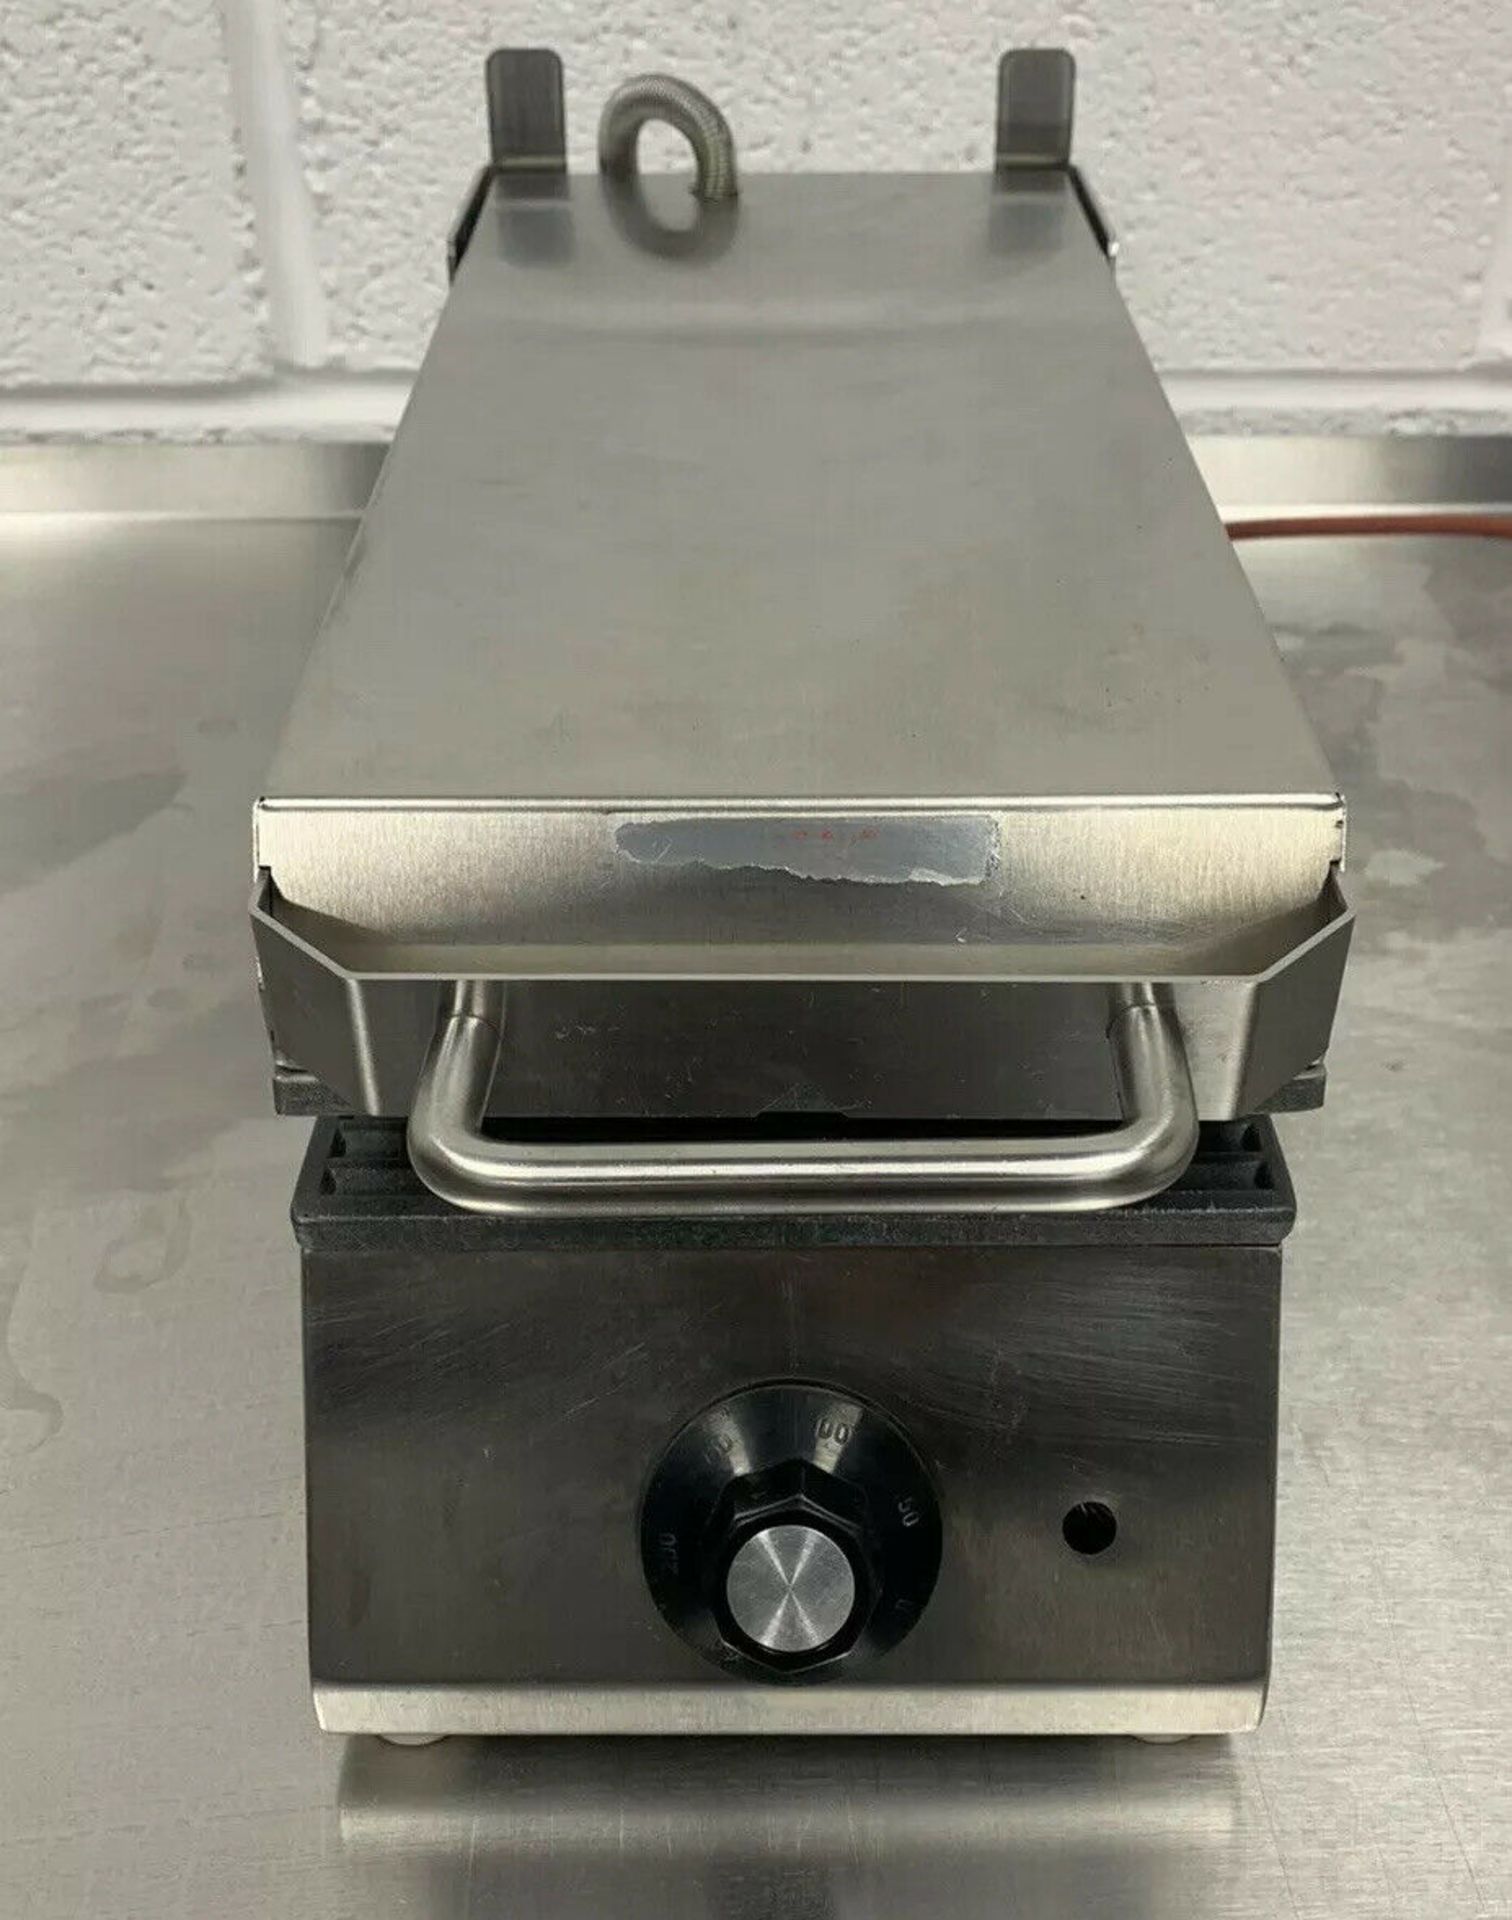 FKI TM05 Double Contact Panini Grill - Image 2 of 4